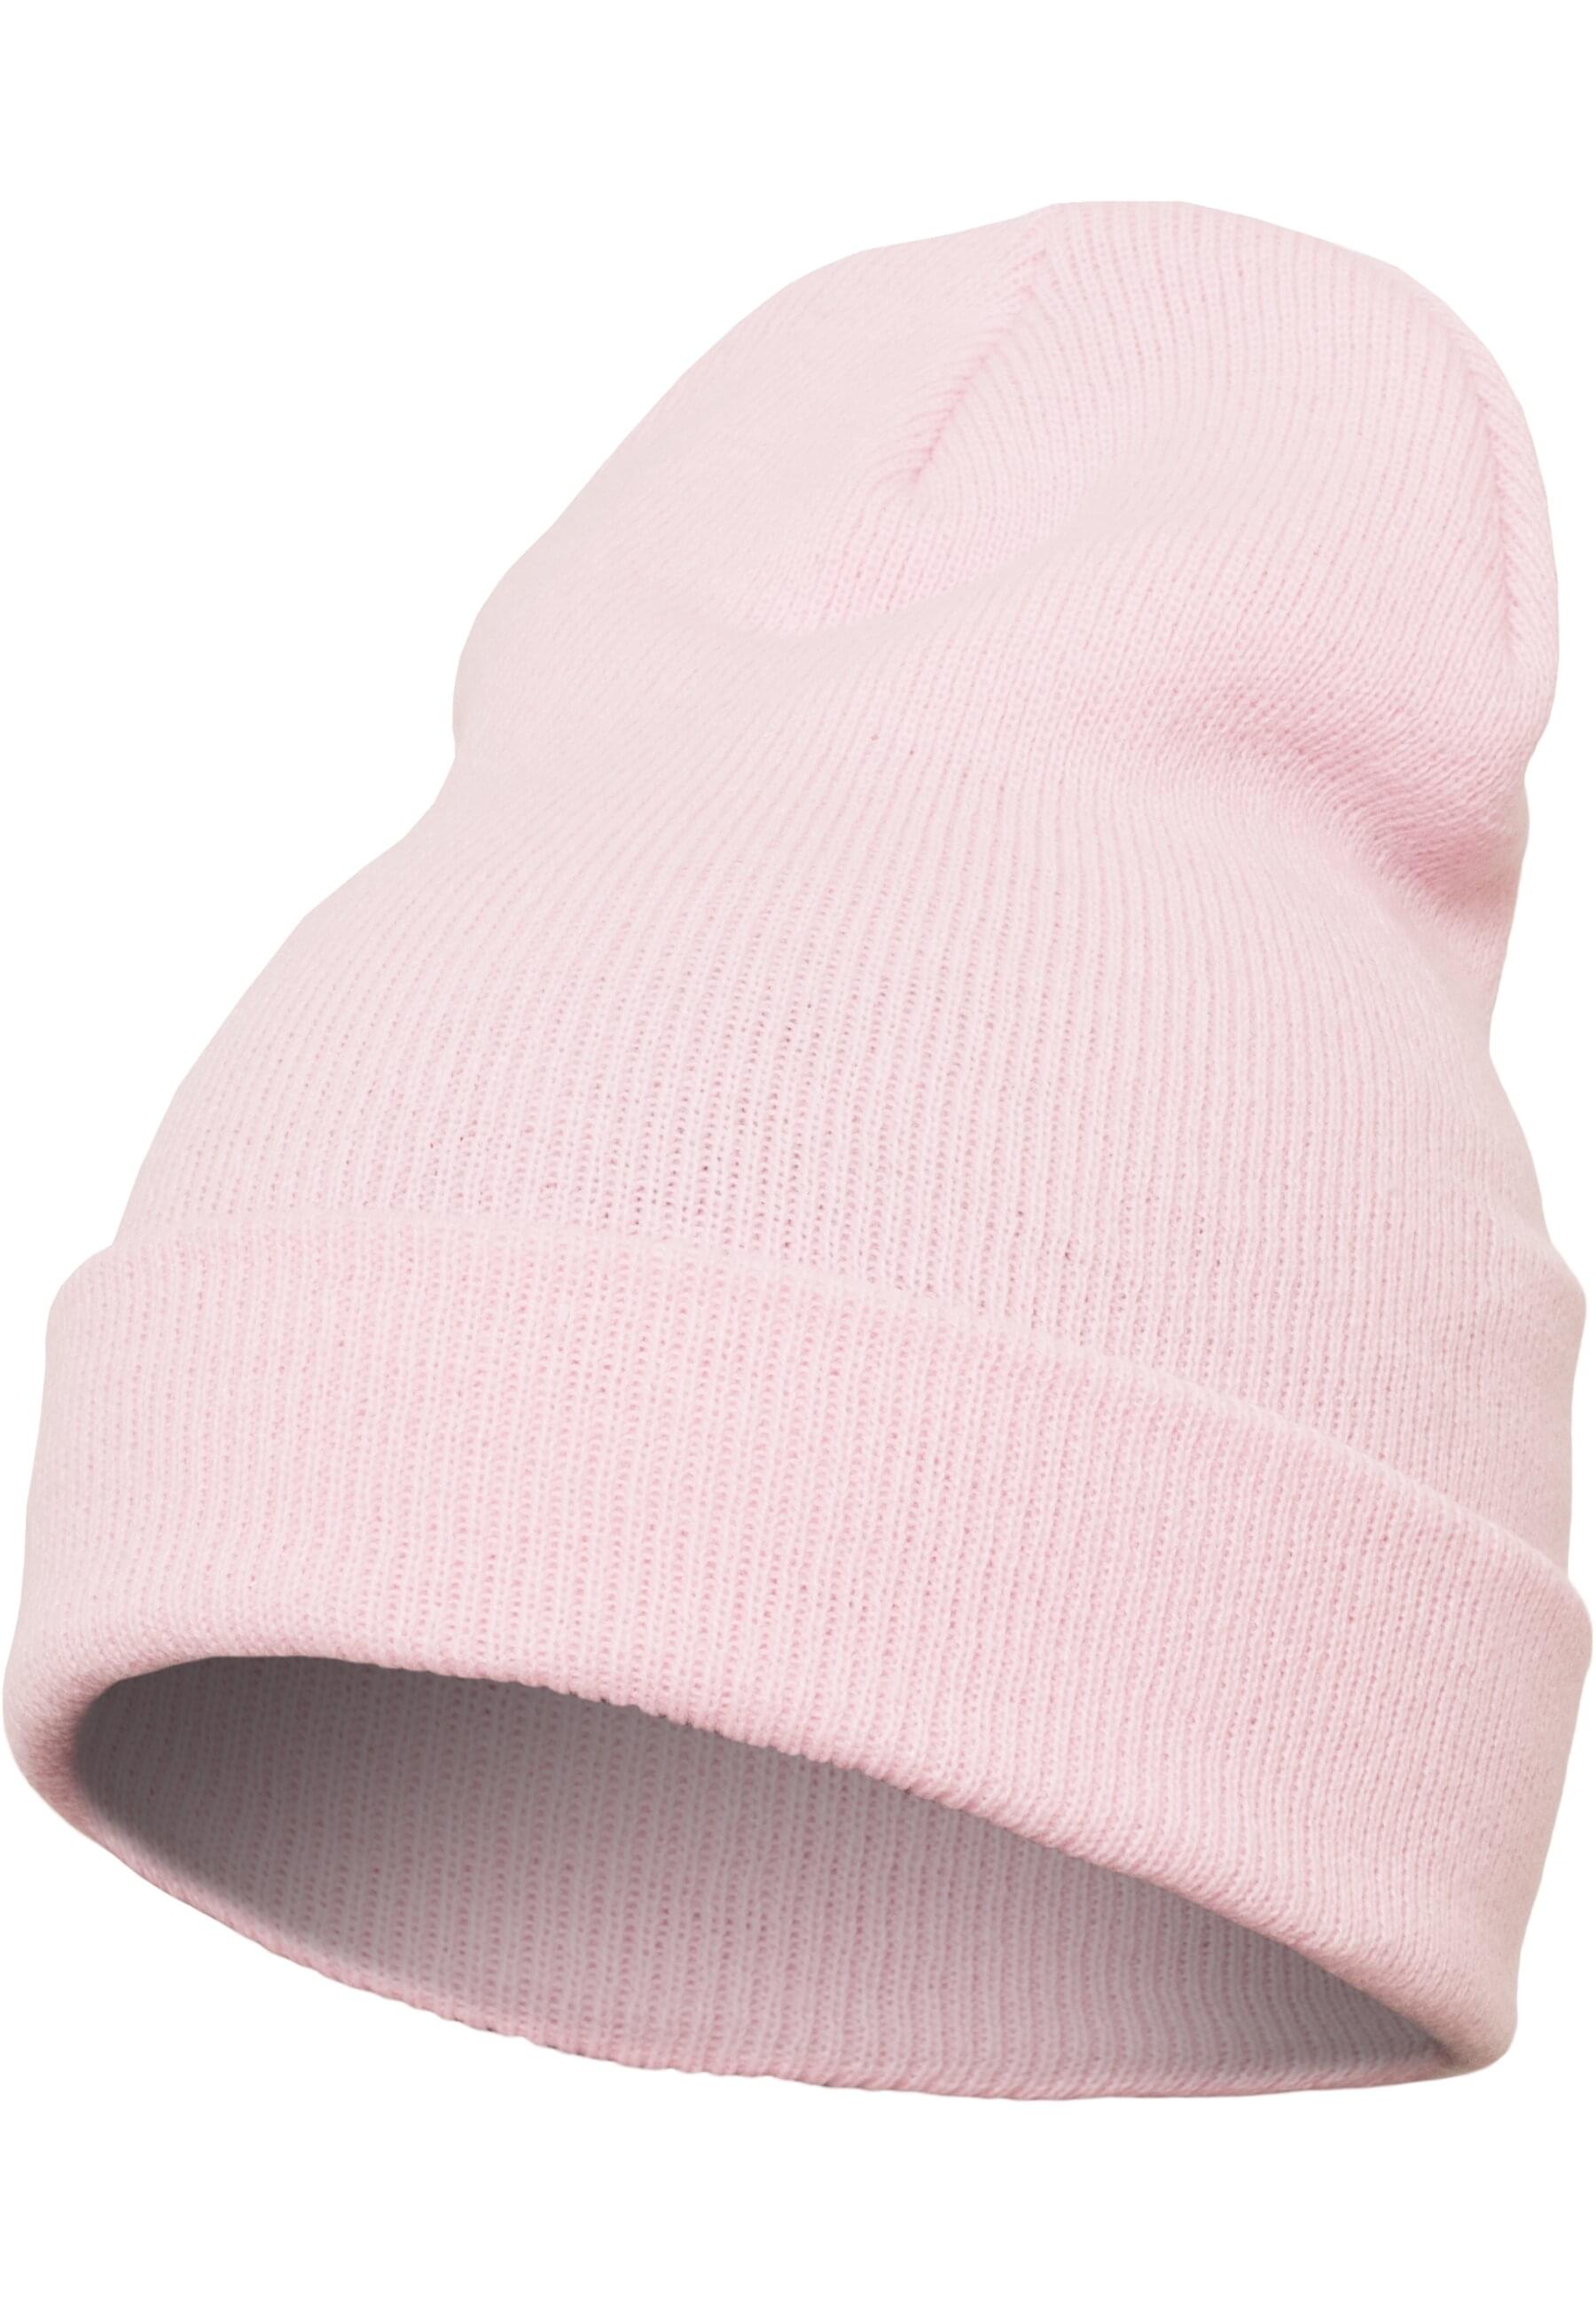 Кепка Flexfit, цвет baby pink pink cupcake baby organic toy baby knitted baby